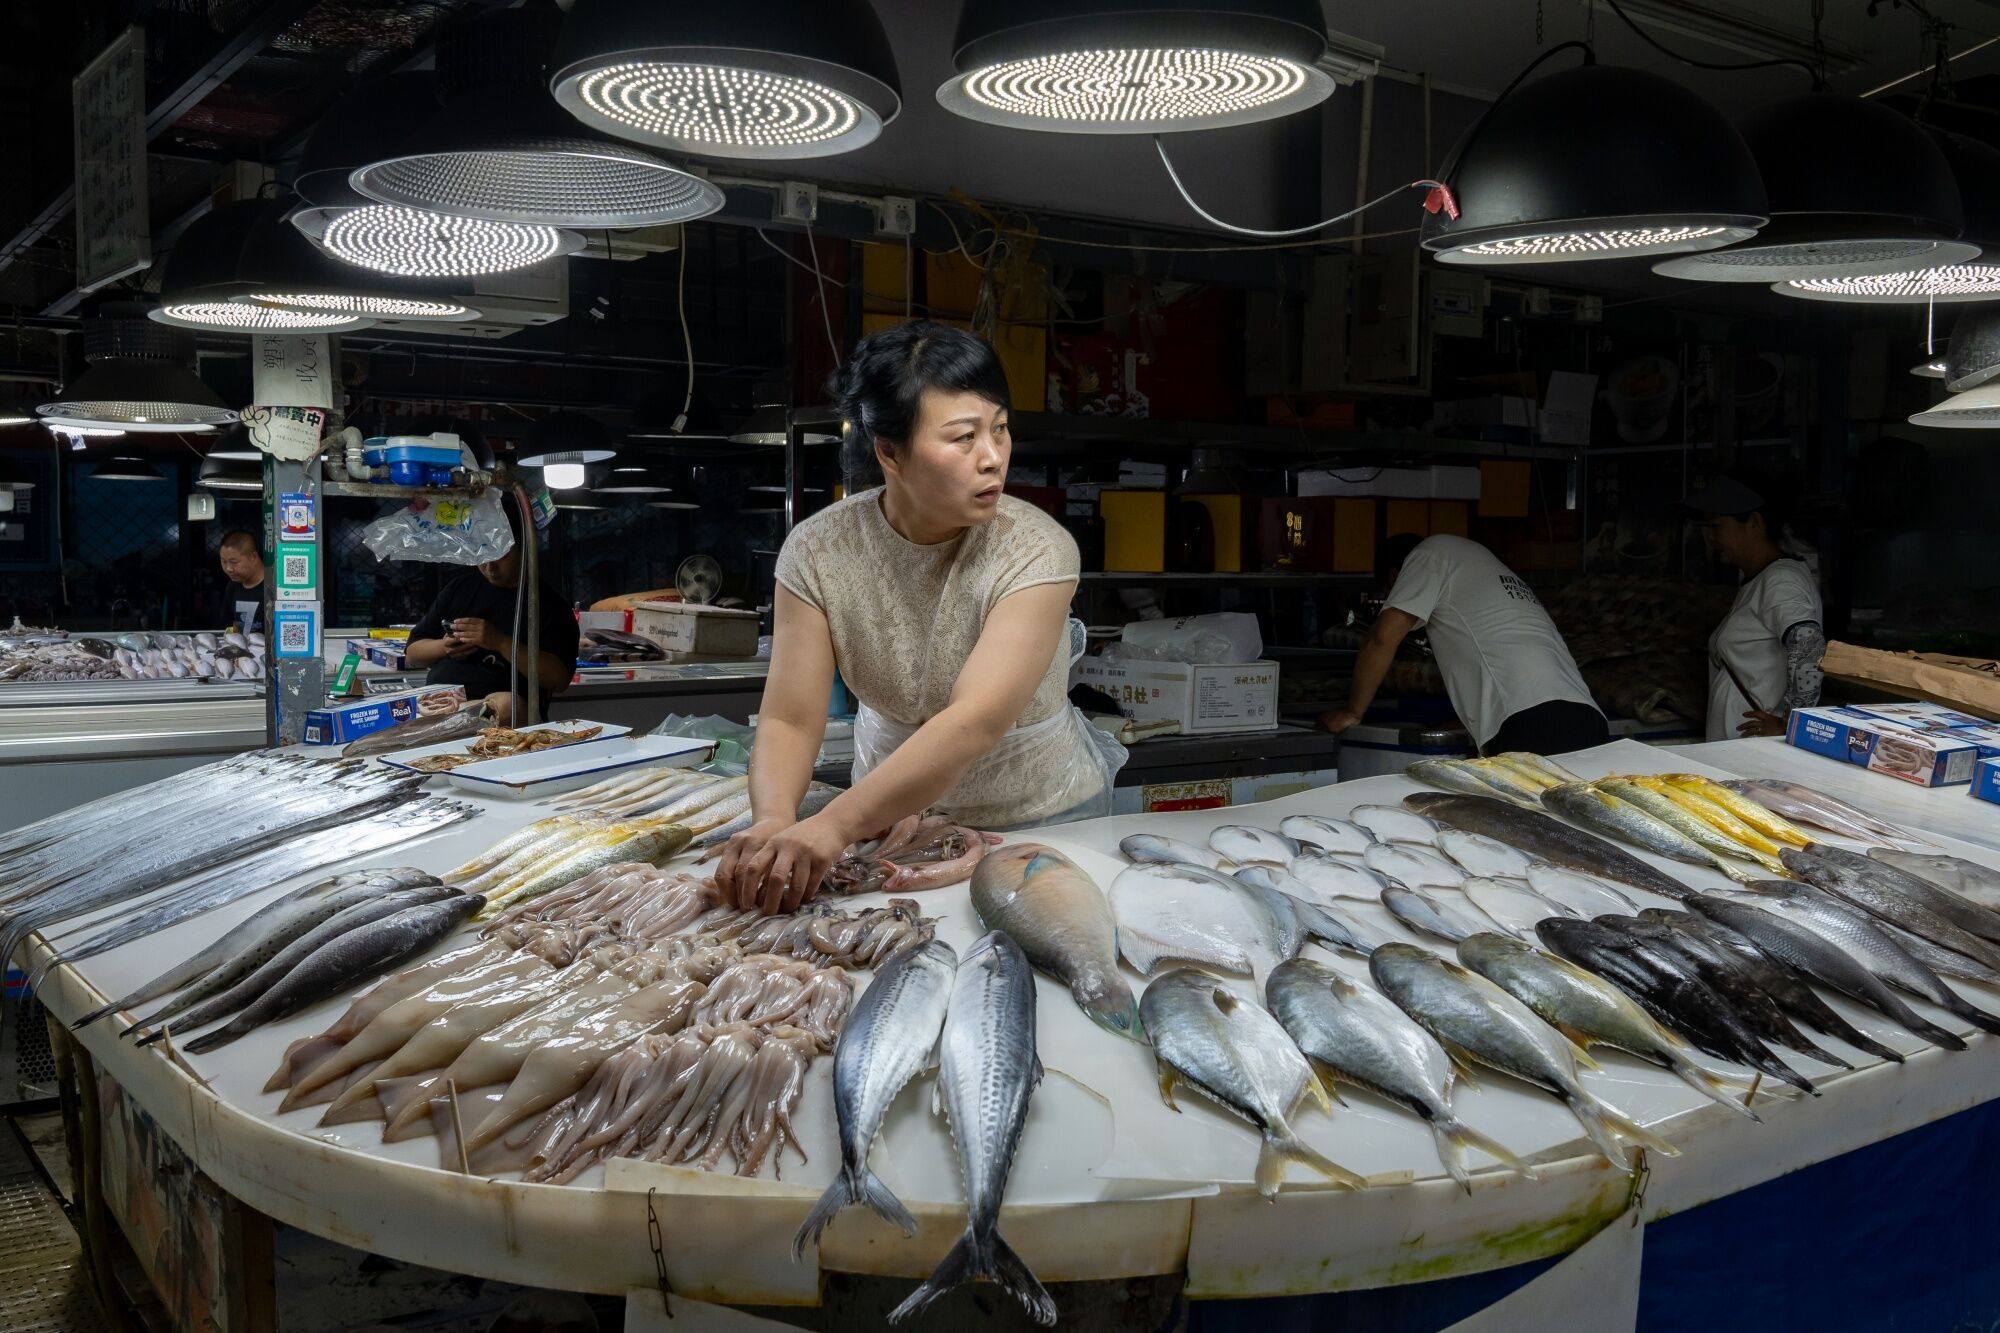 Members of the European Parliament are looking to press China on its fishing practices. Photo: Bloomberg